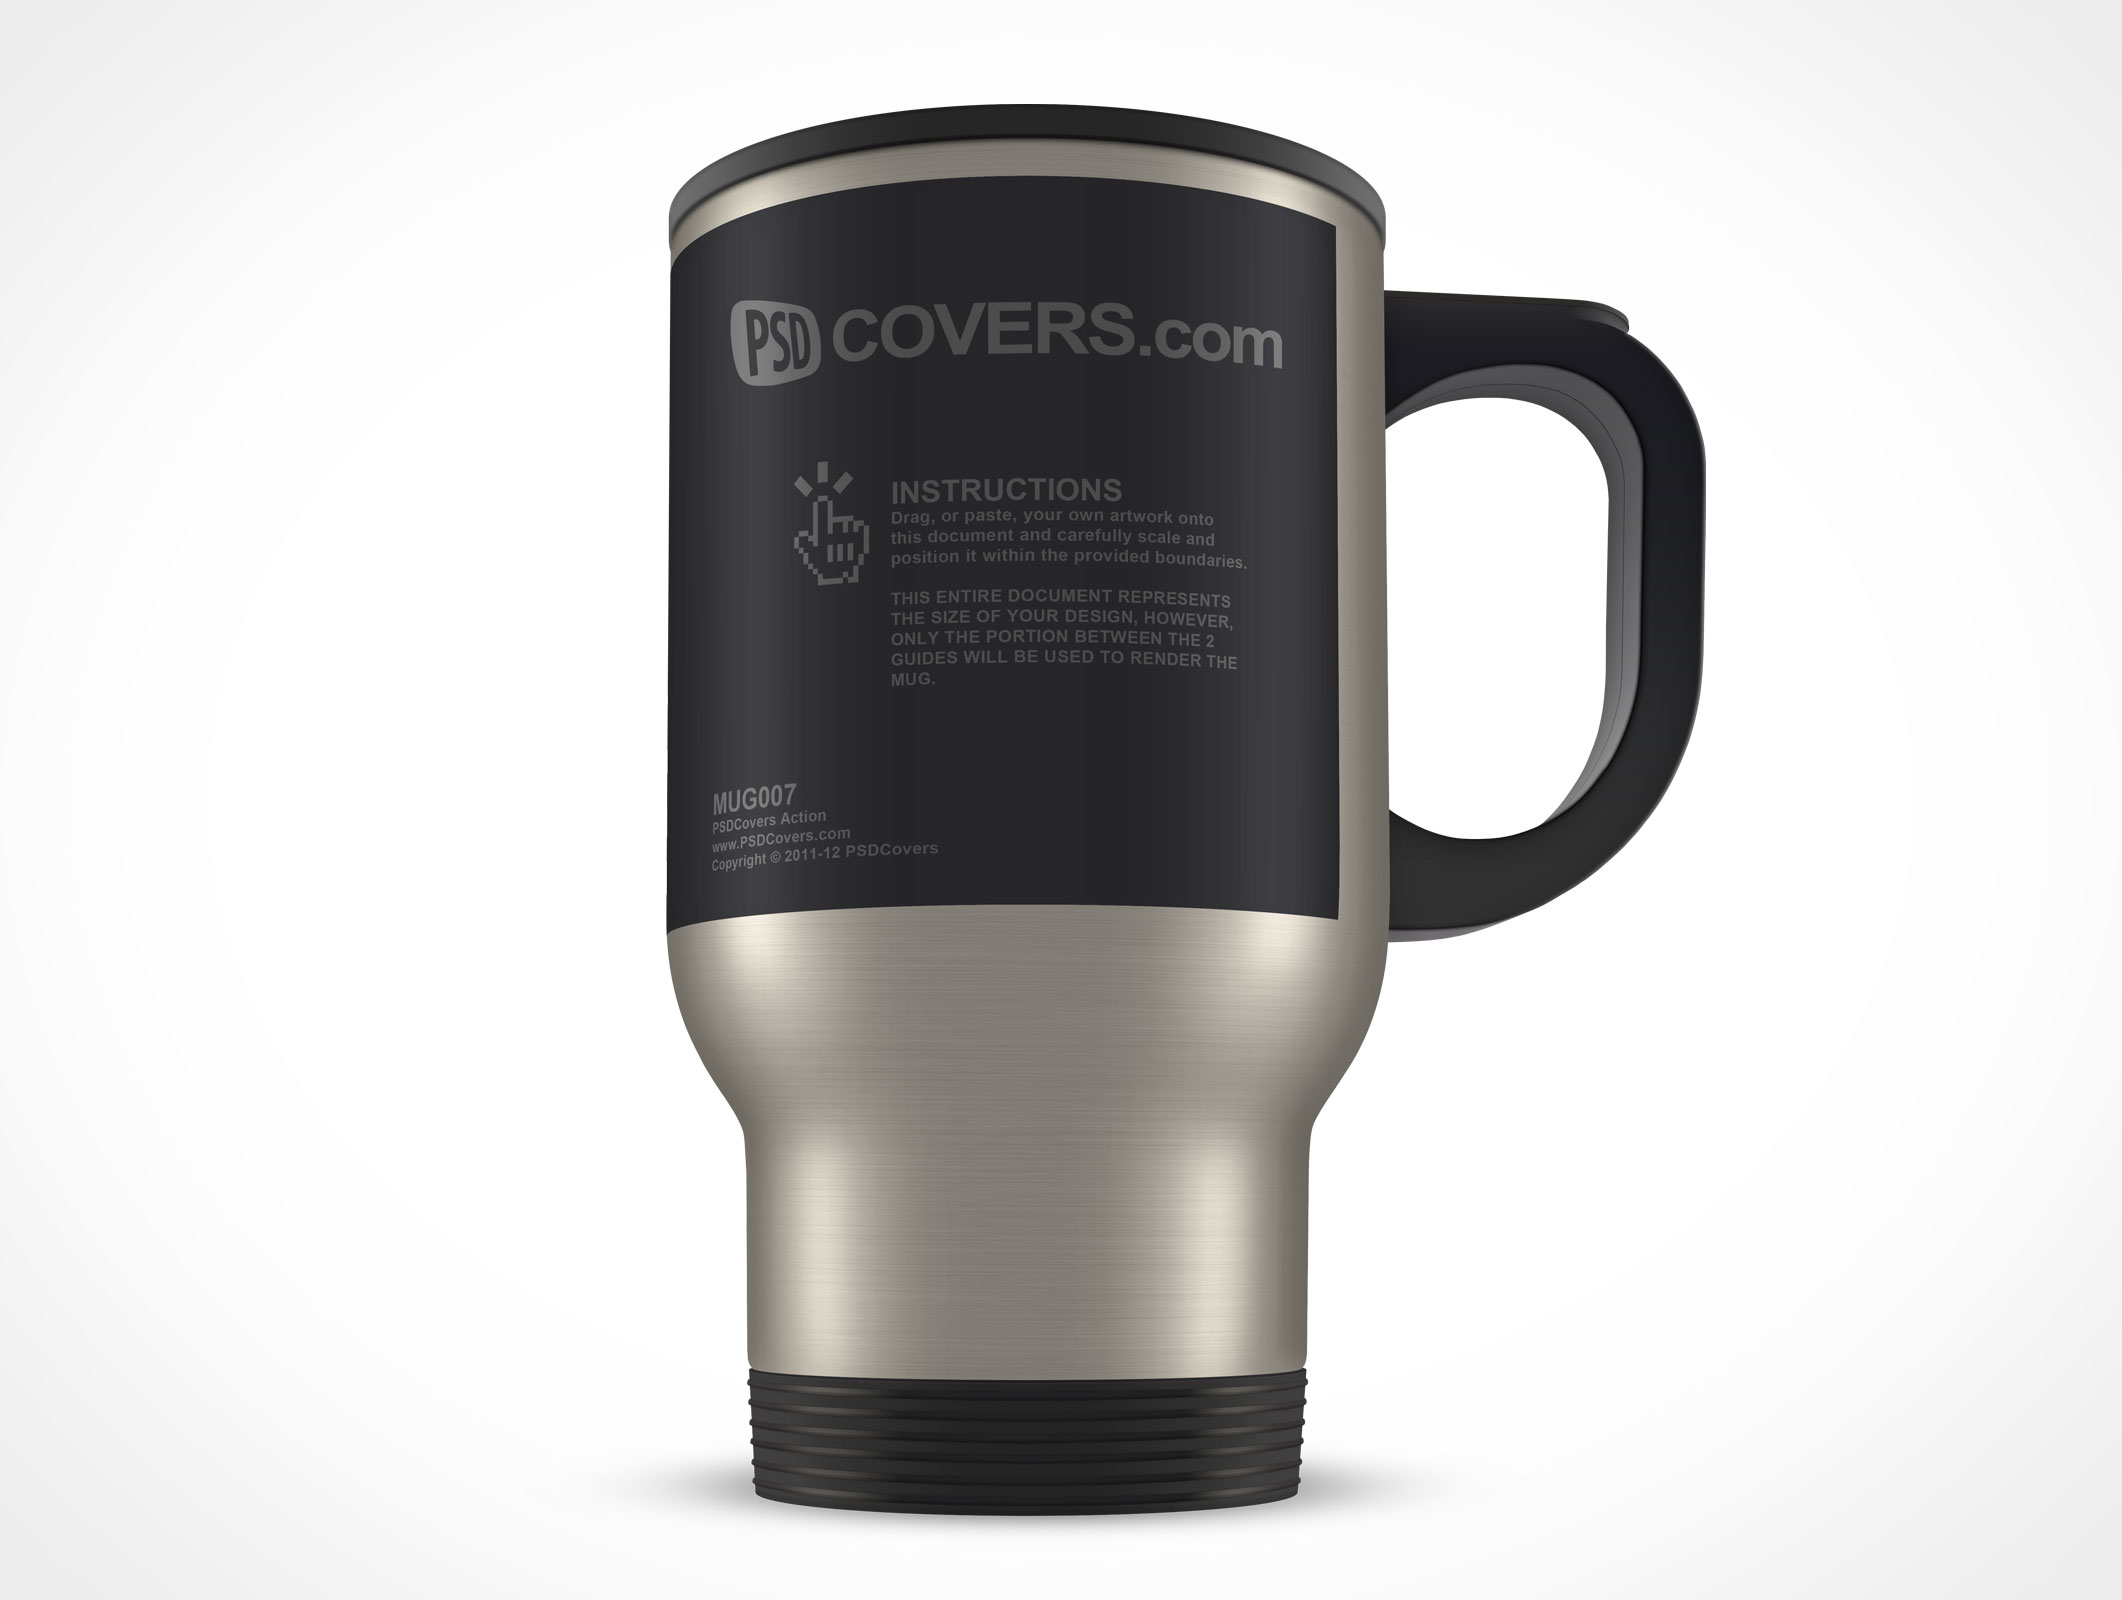 Download MUG007 • Market Your PSD Mockups for Thermos